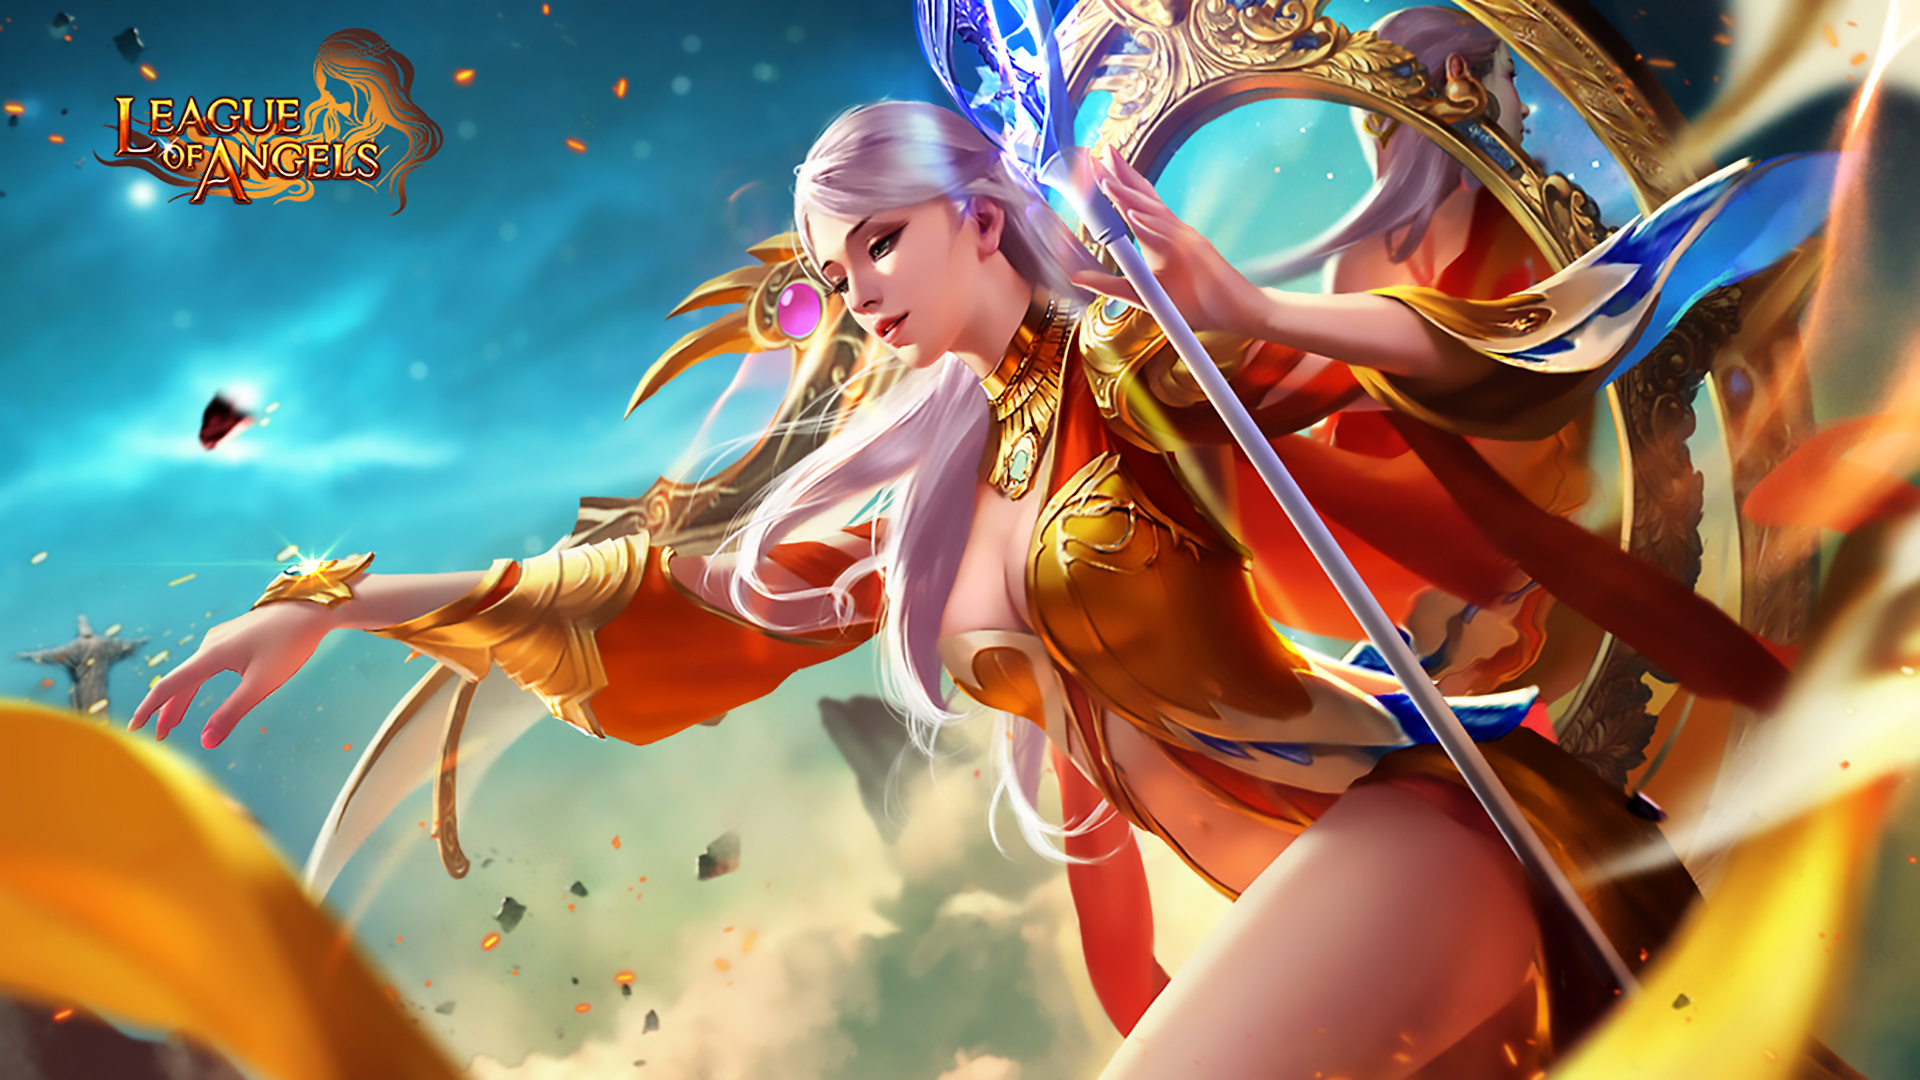 League of Angels, posted by sarah anderson, fanmade wallpapers, angelic artwork, 1920x1080 Full HD Desktop